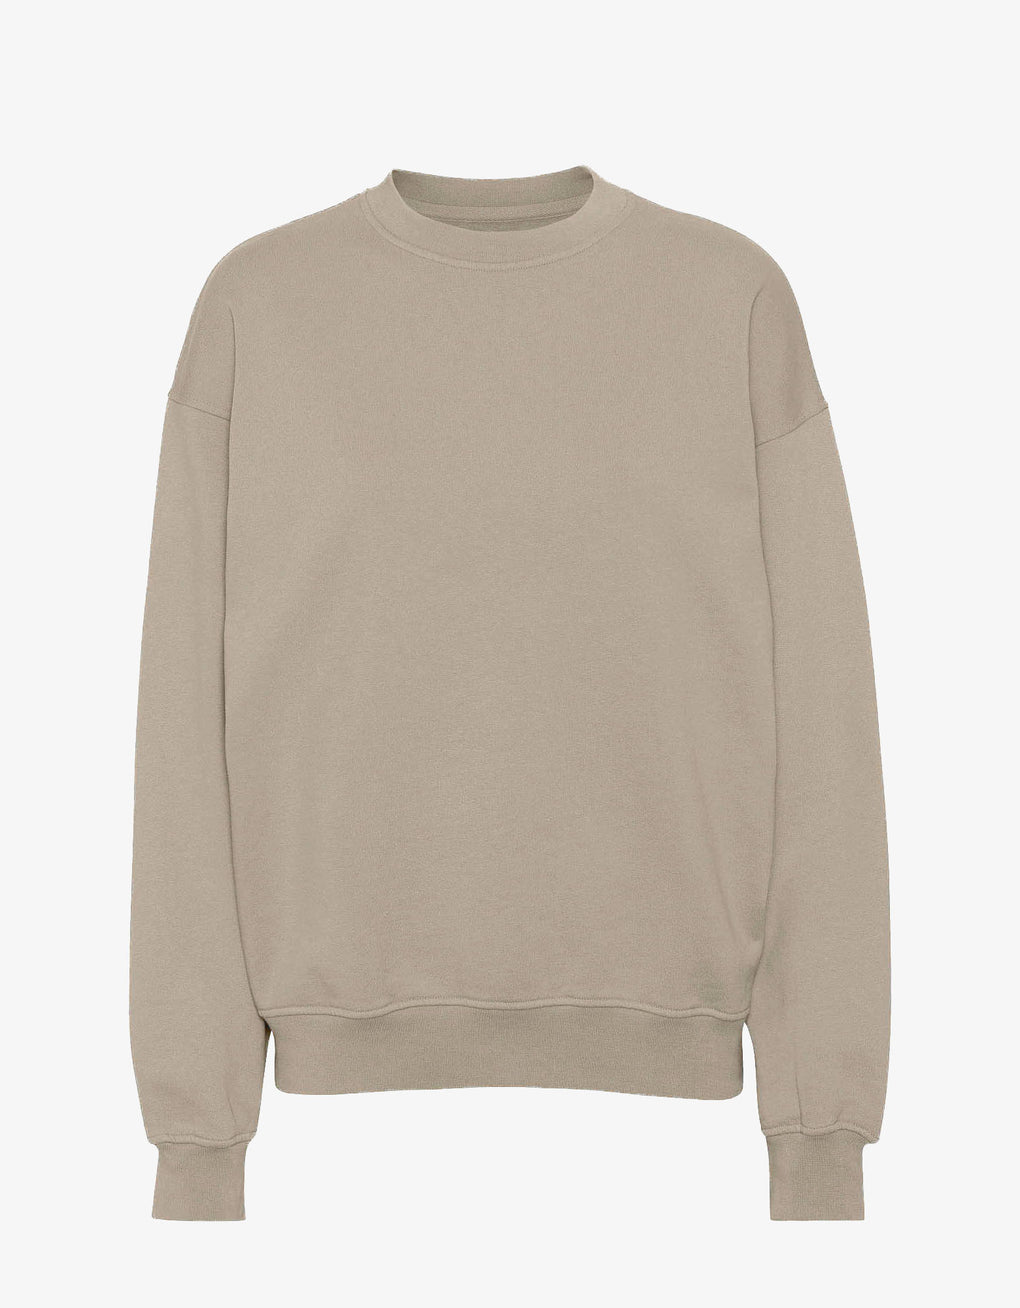 Organic oversized crew sweater in oyster grey